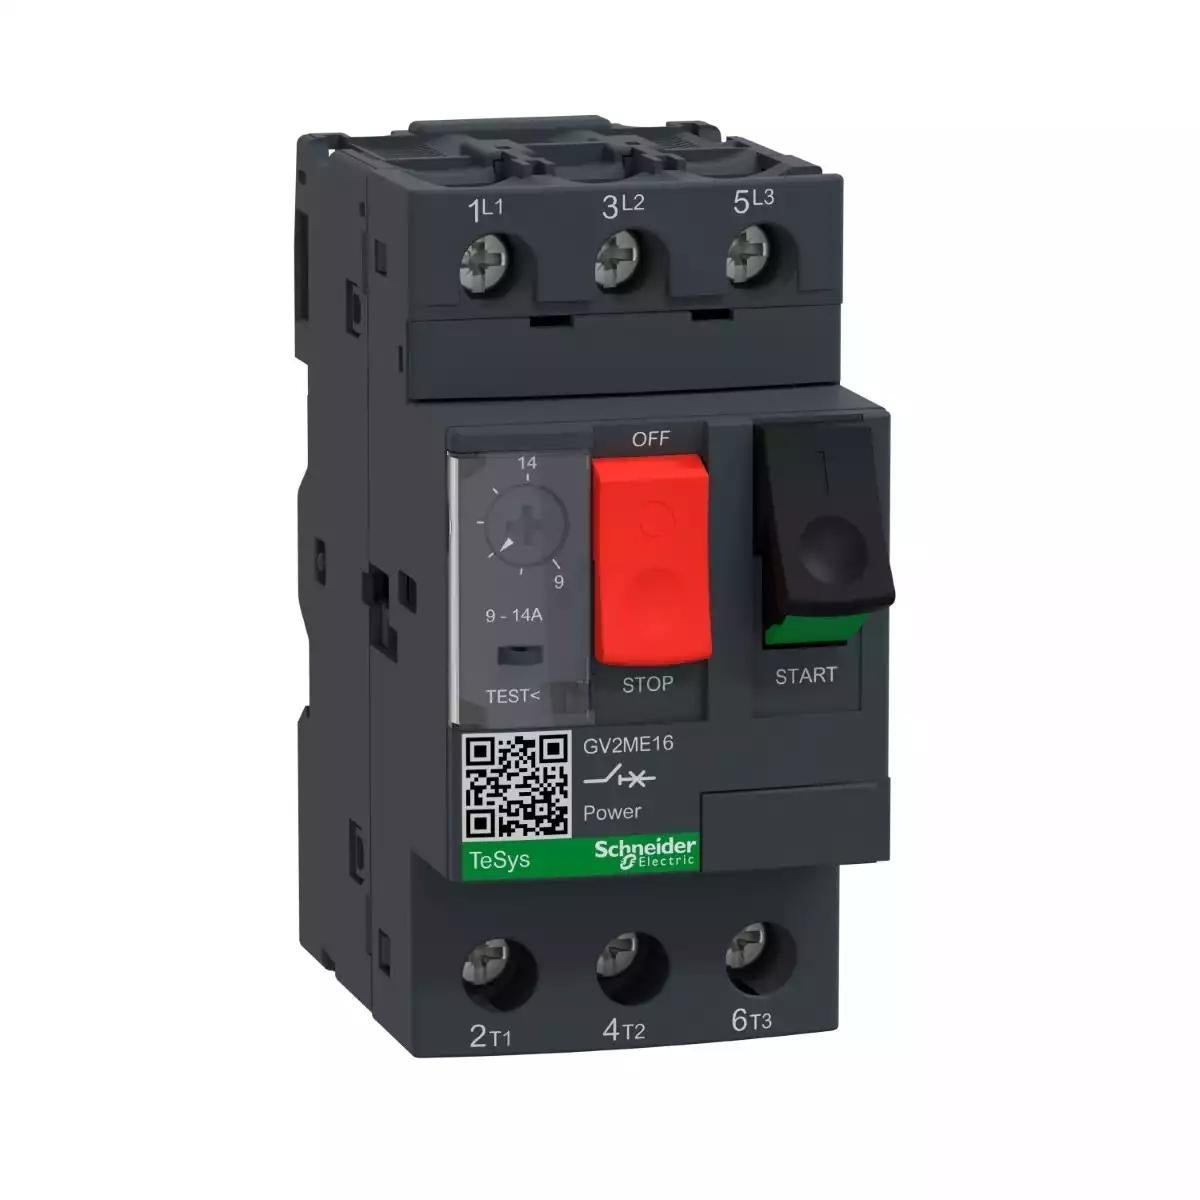 Schneider Electric TeSys GV2-Circuit breaker-thermal-magnetic - 9...14 A - screw clamp terminals